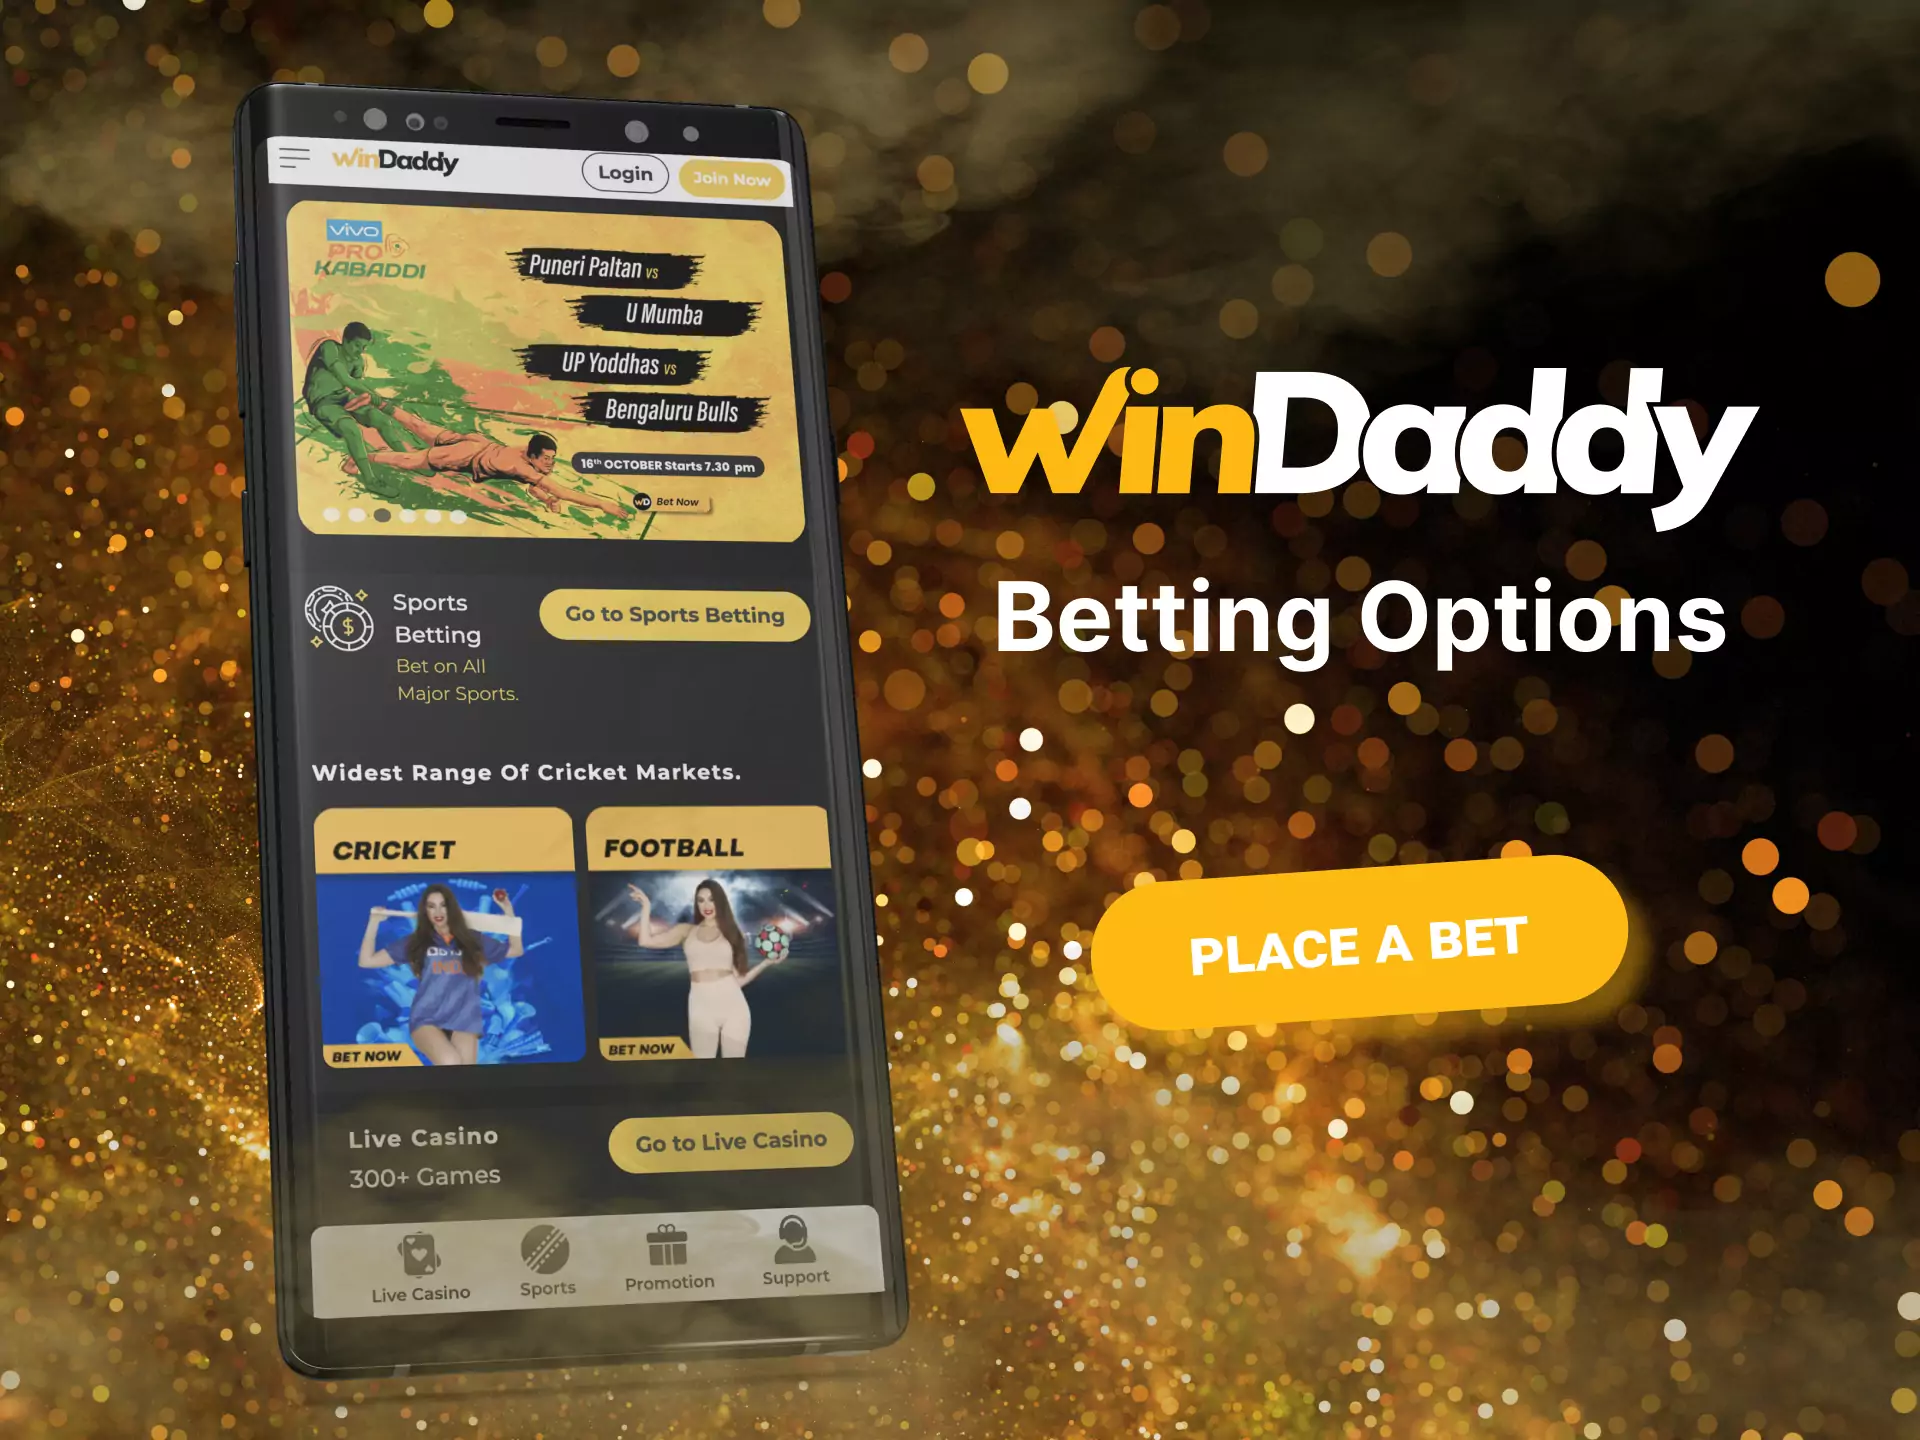 Bet on many sports at Windaddy and enjoy the game.